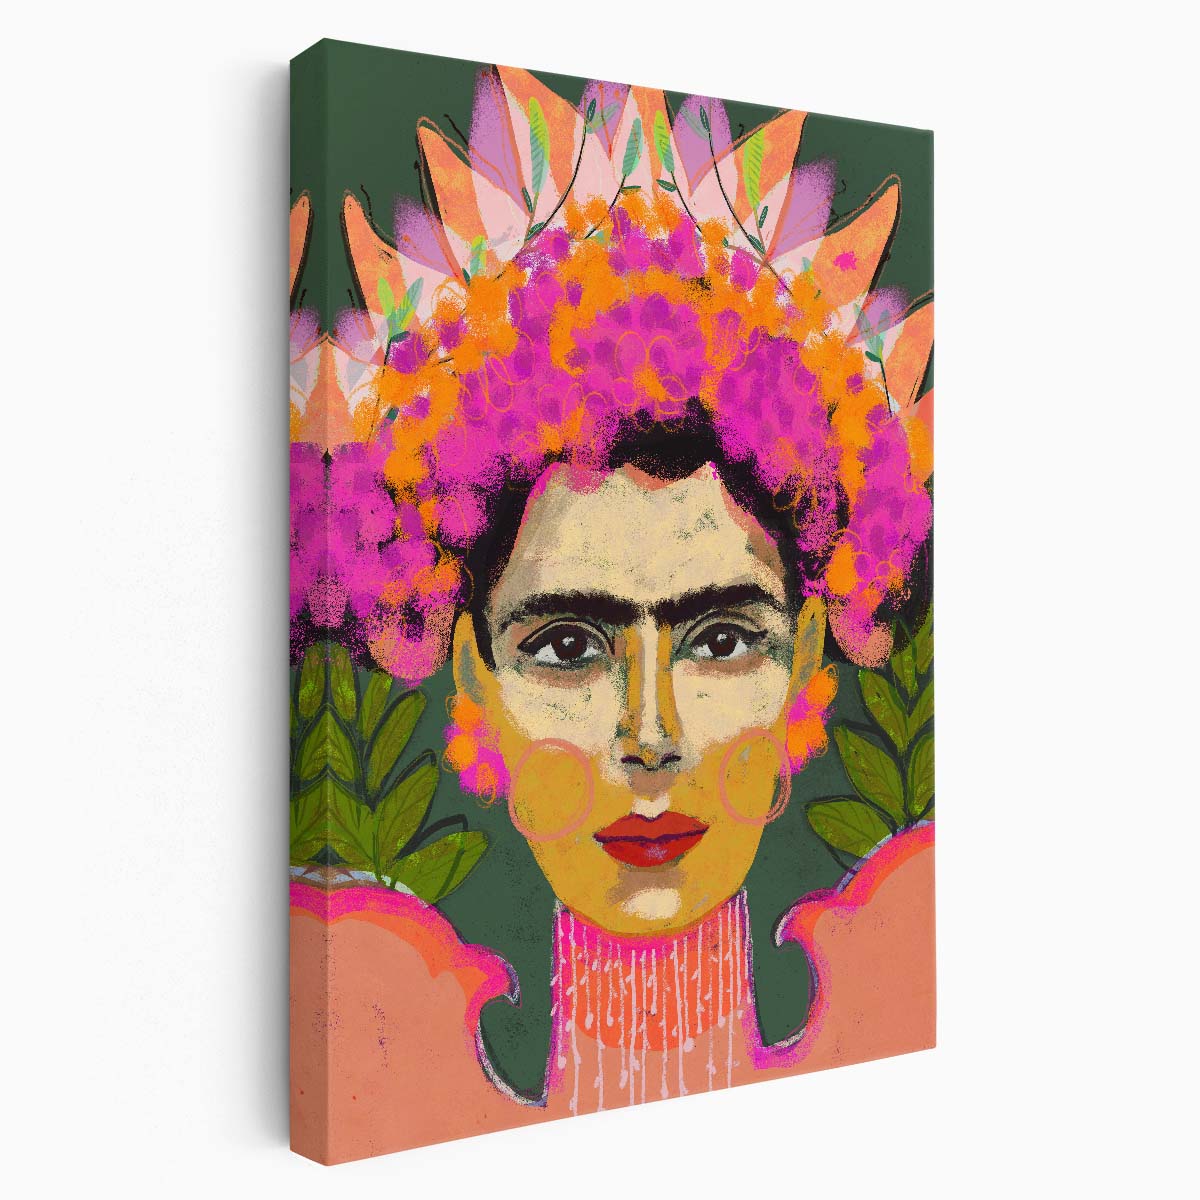 Frida Kahlo Colorful Portrait Illustration with Floral Wreath by Treechild by Luxuriance Designs, made in USA